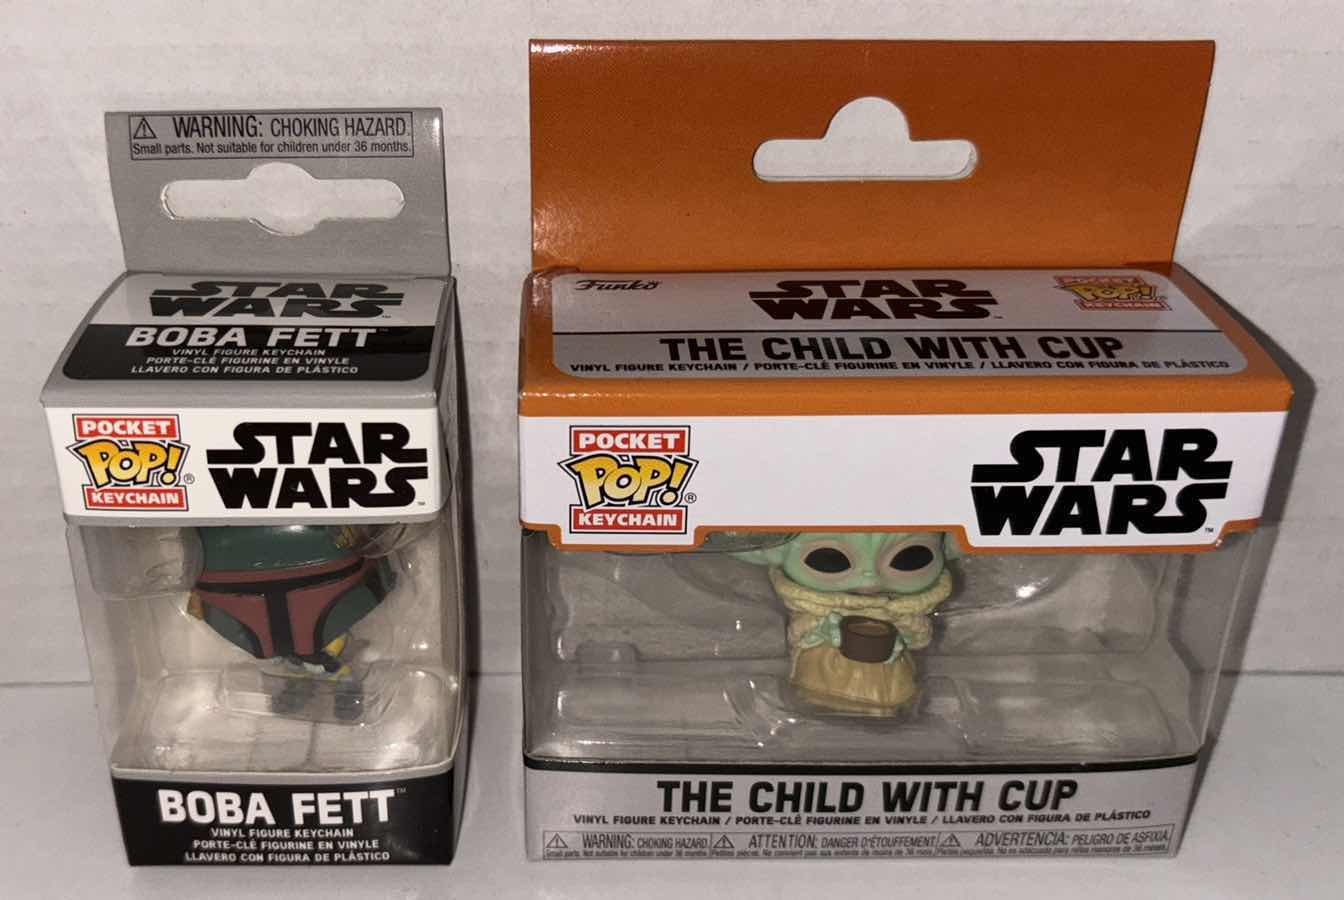 Photo 2 of NEW FUNKO POP! POCKET KEYCHAIN 2-PACK, STAR WARS “BOBA FETT” & “ THE CHILD WITH CUP”